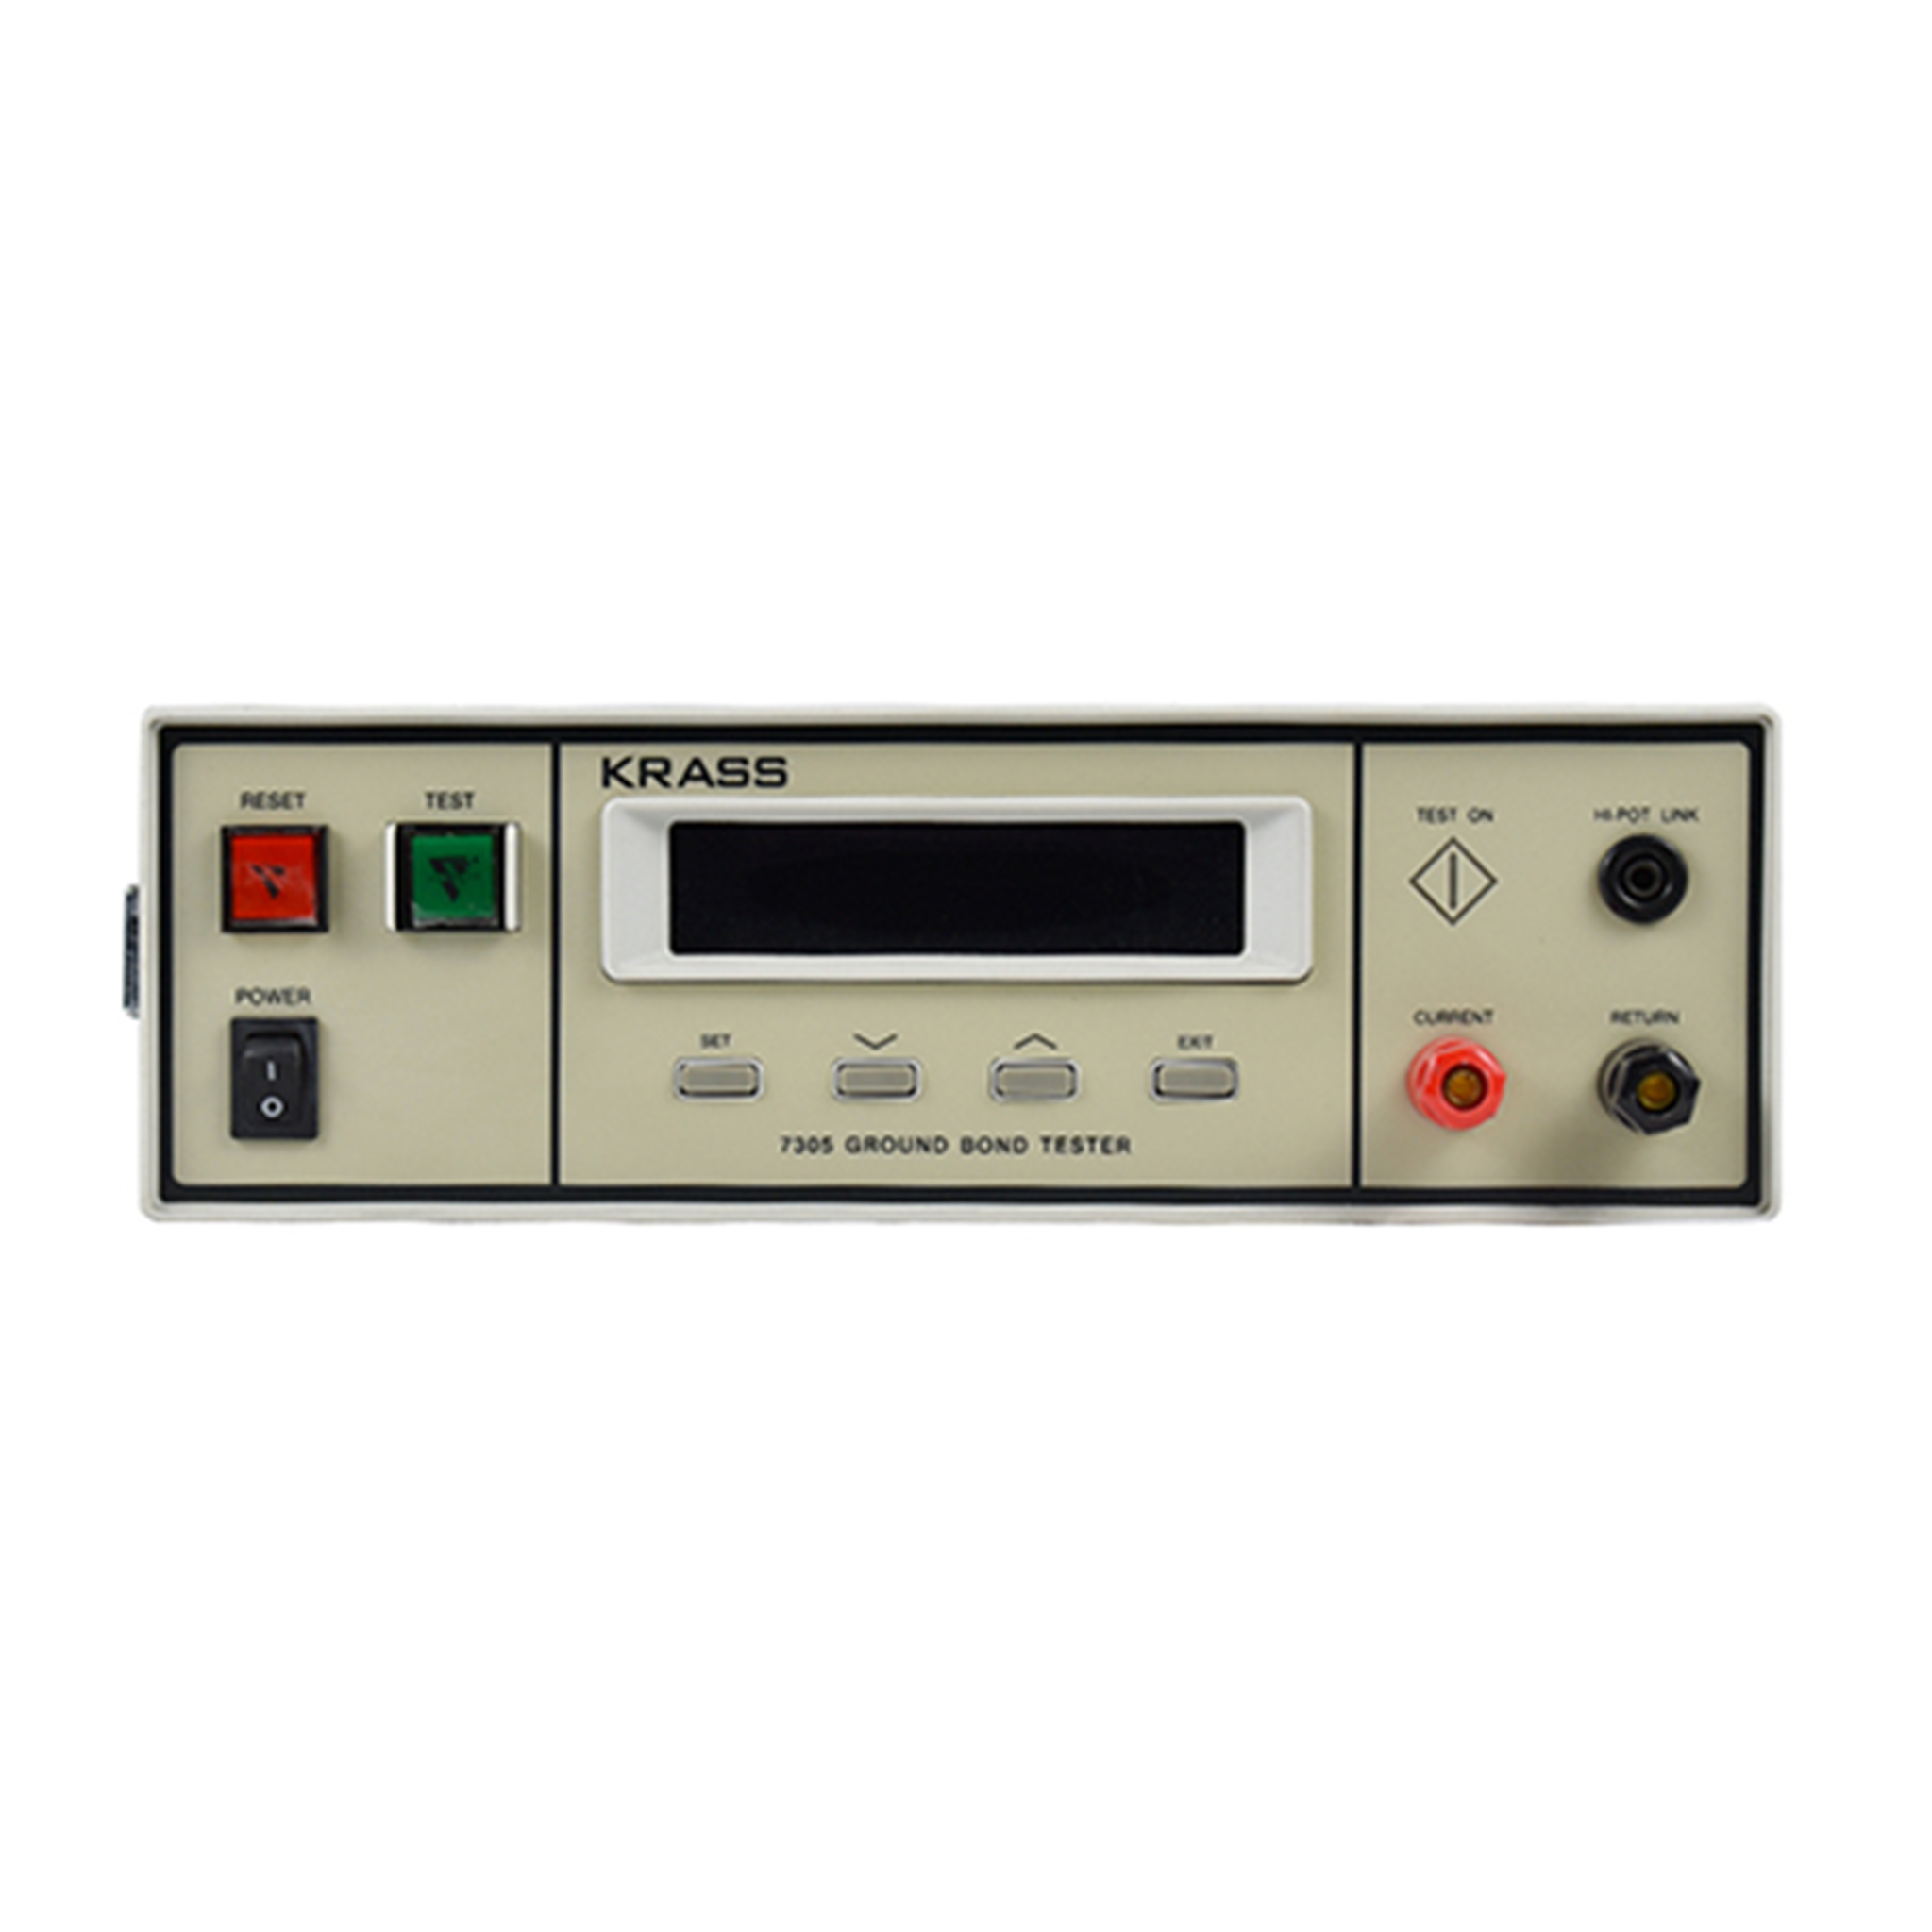 7305 Program controlled grounding resistance tester